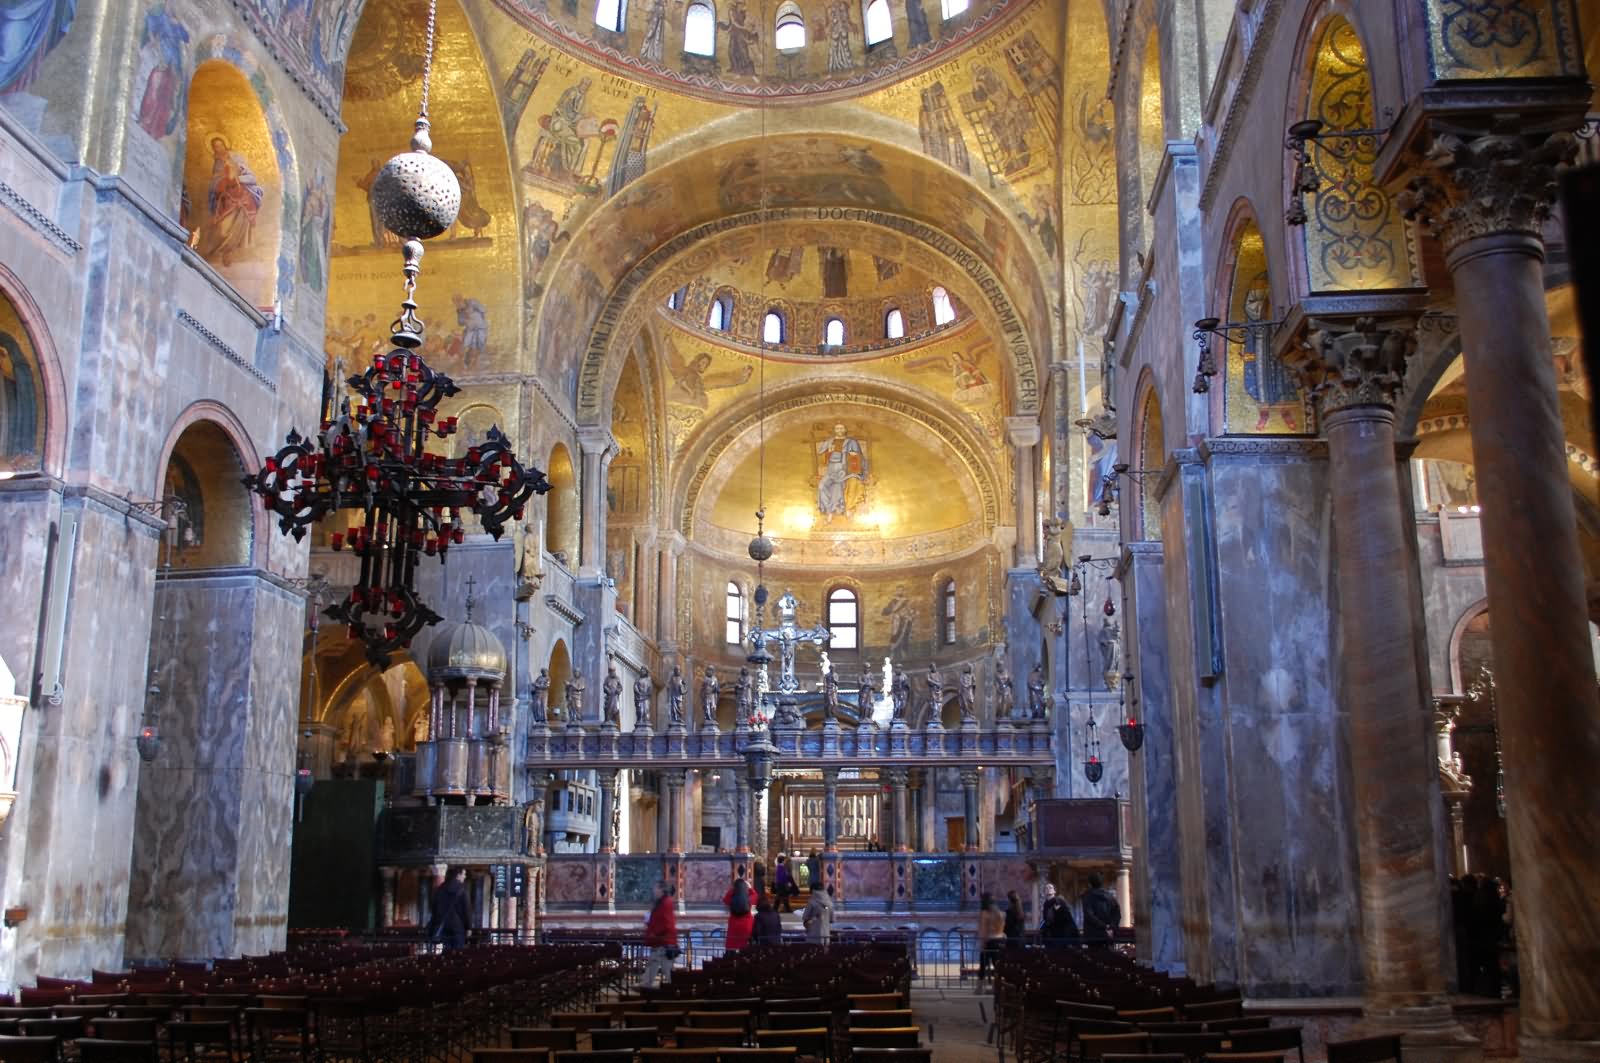 30 Most Incredible Interior Pictures Of St. Mark’s Basilica, Venice